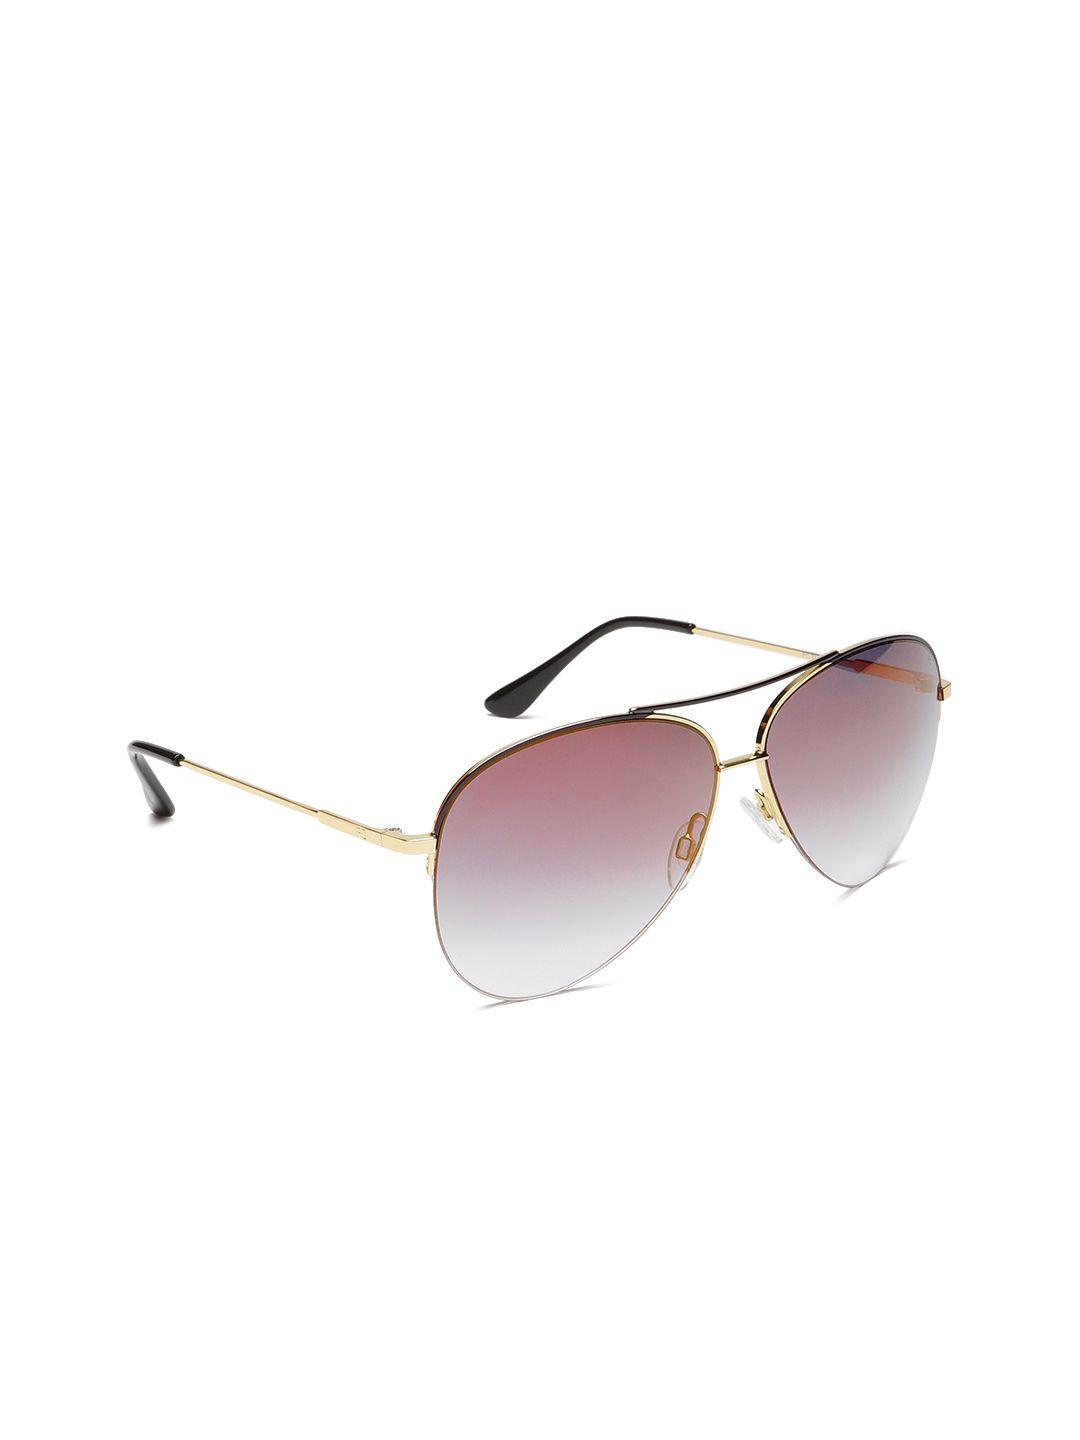 french connection unisex gold-toned aviator sunglasses fc 7437